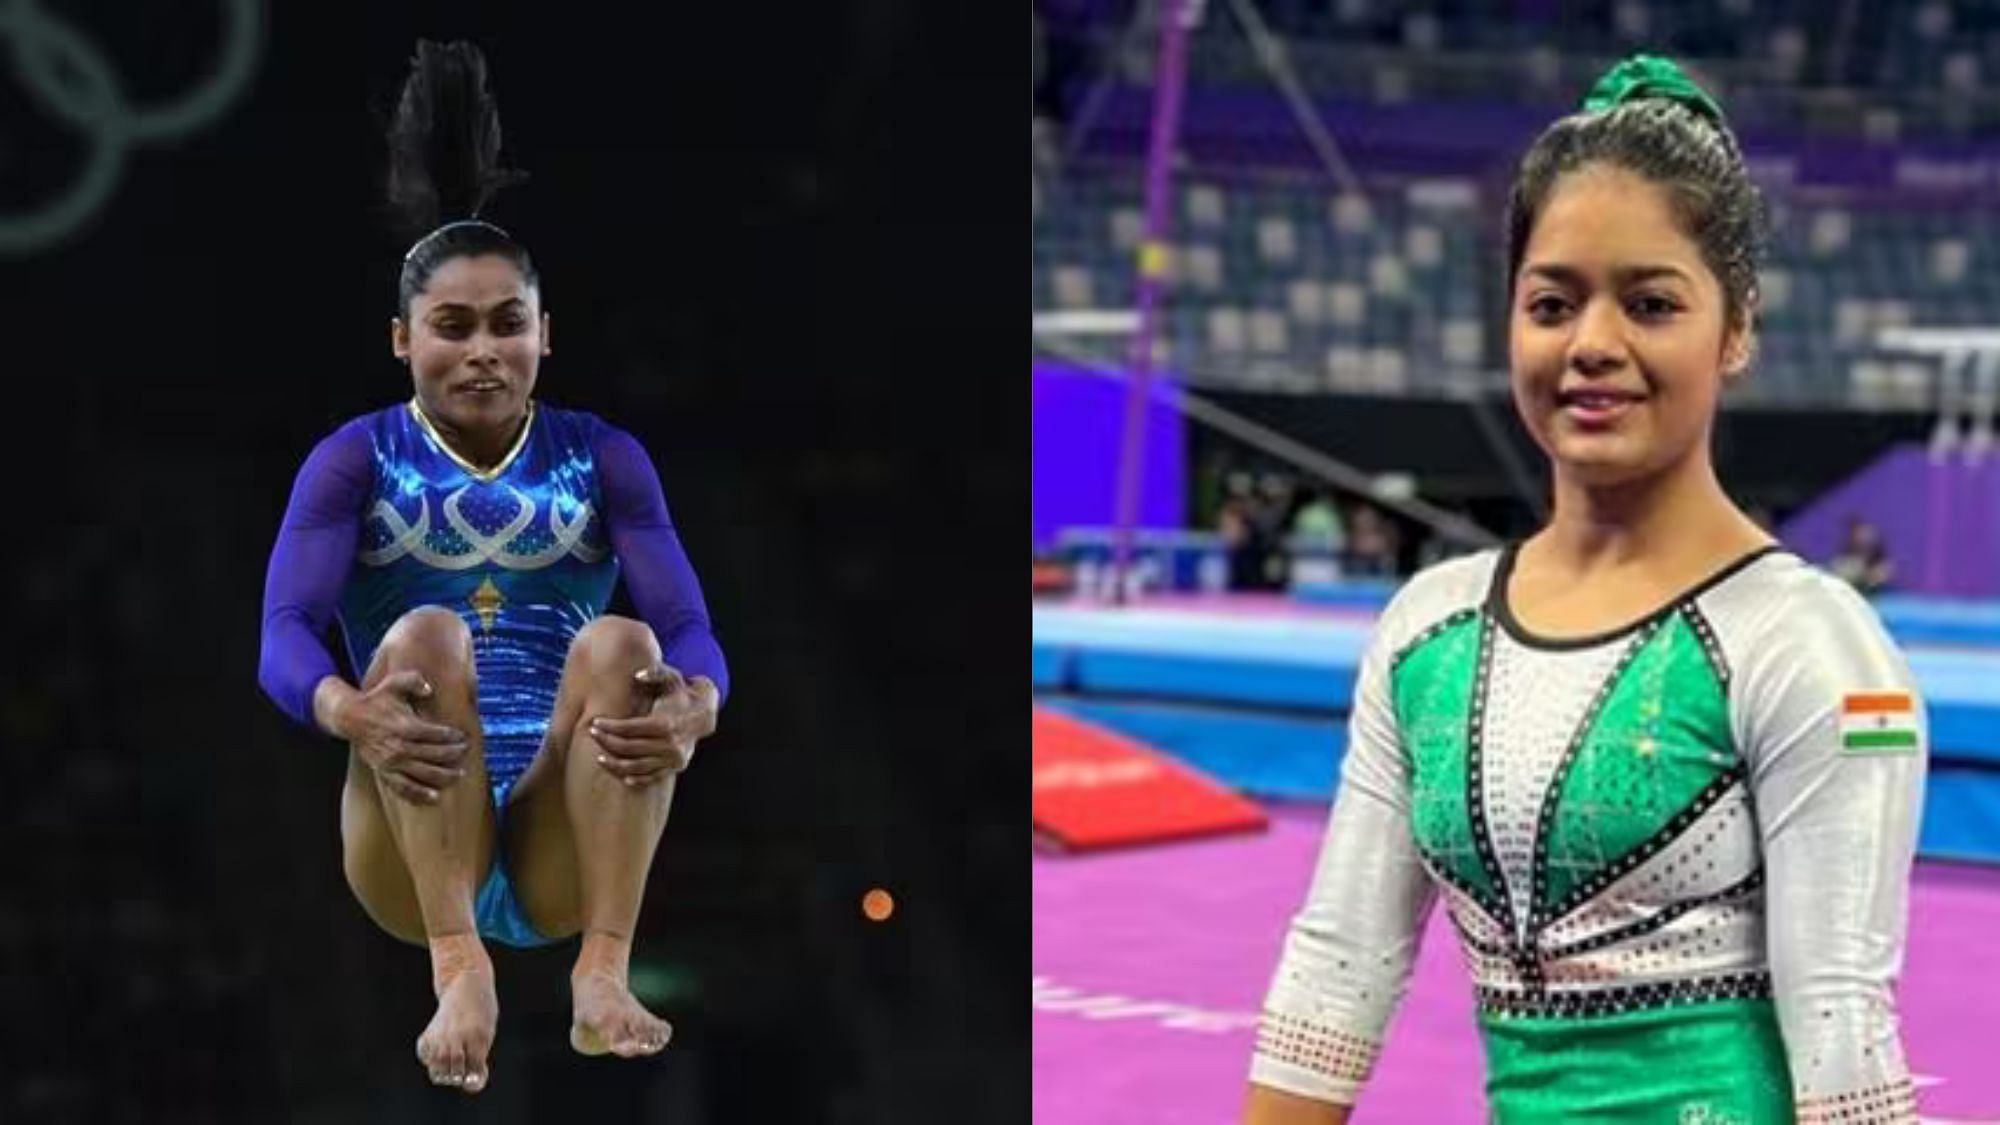 <div class="paragraphs"><p>Dipa Karmakar finsihed 4th in the FIG&nbsp;Gymnastics World Cup while Pranati Nayak finished at 4th place.</p></div>